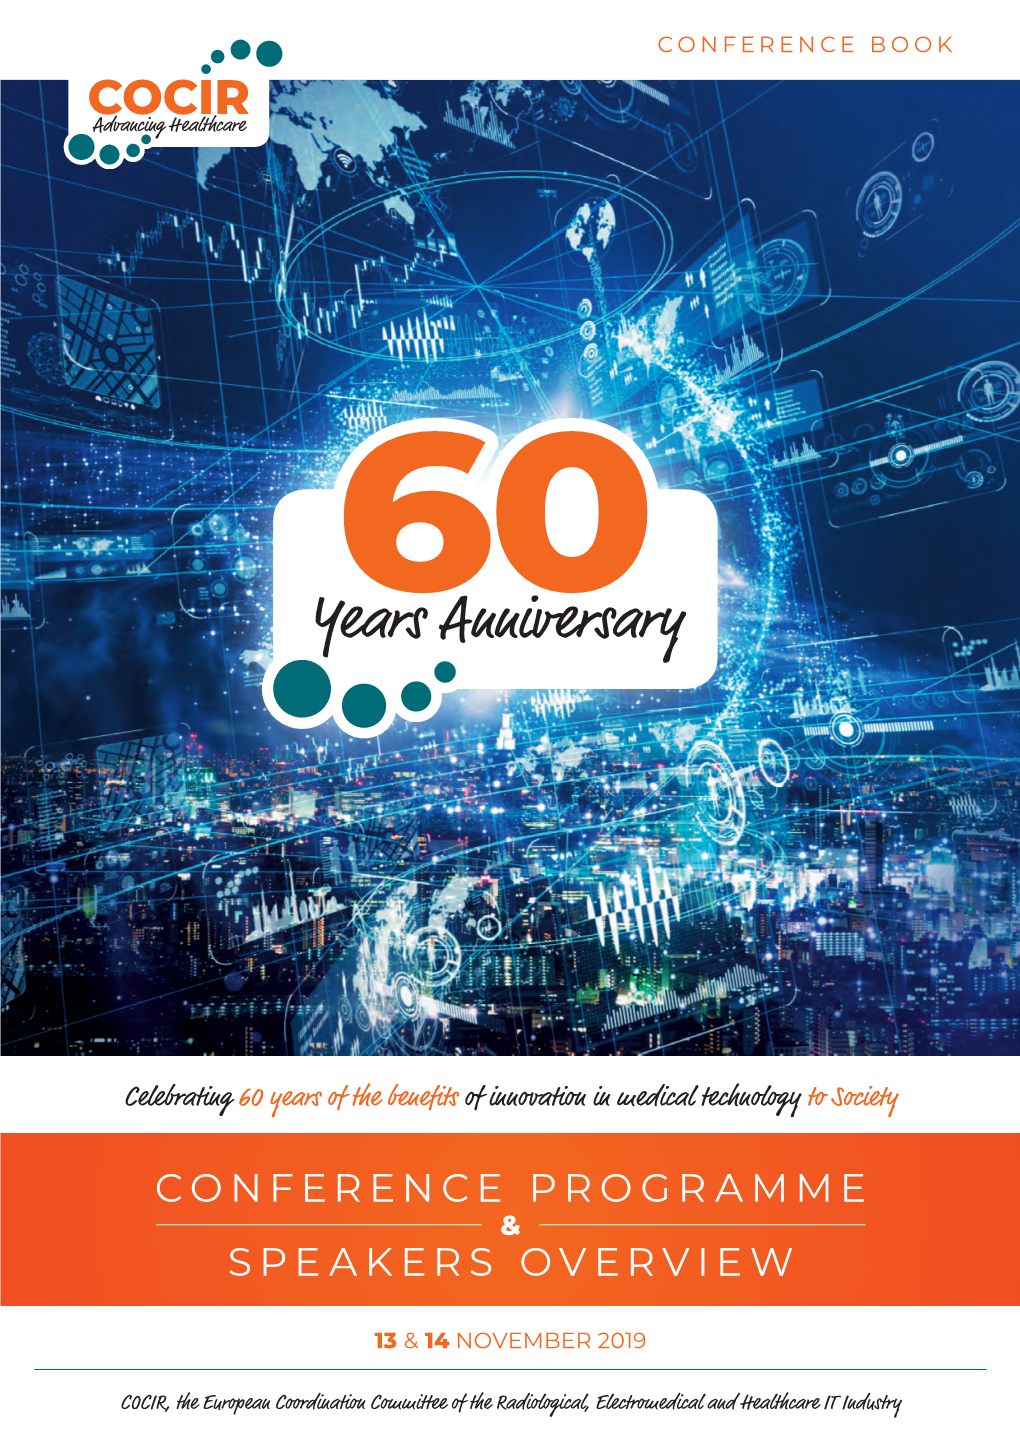 Conference Programme Speakers Overview